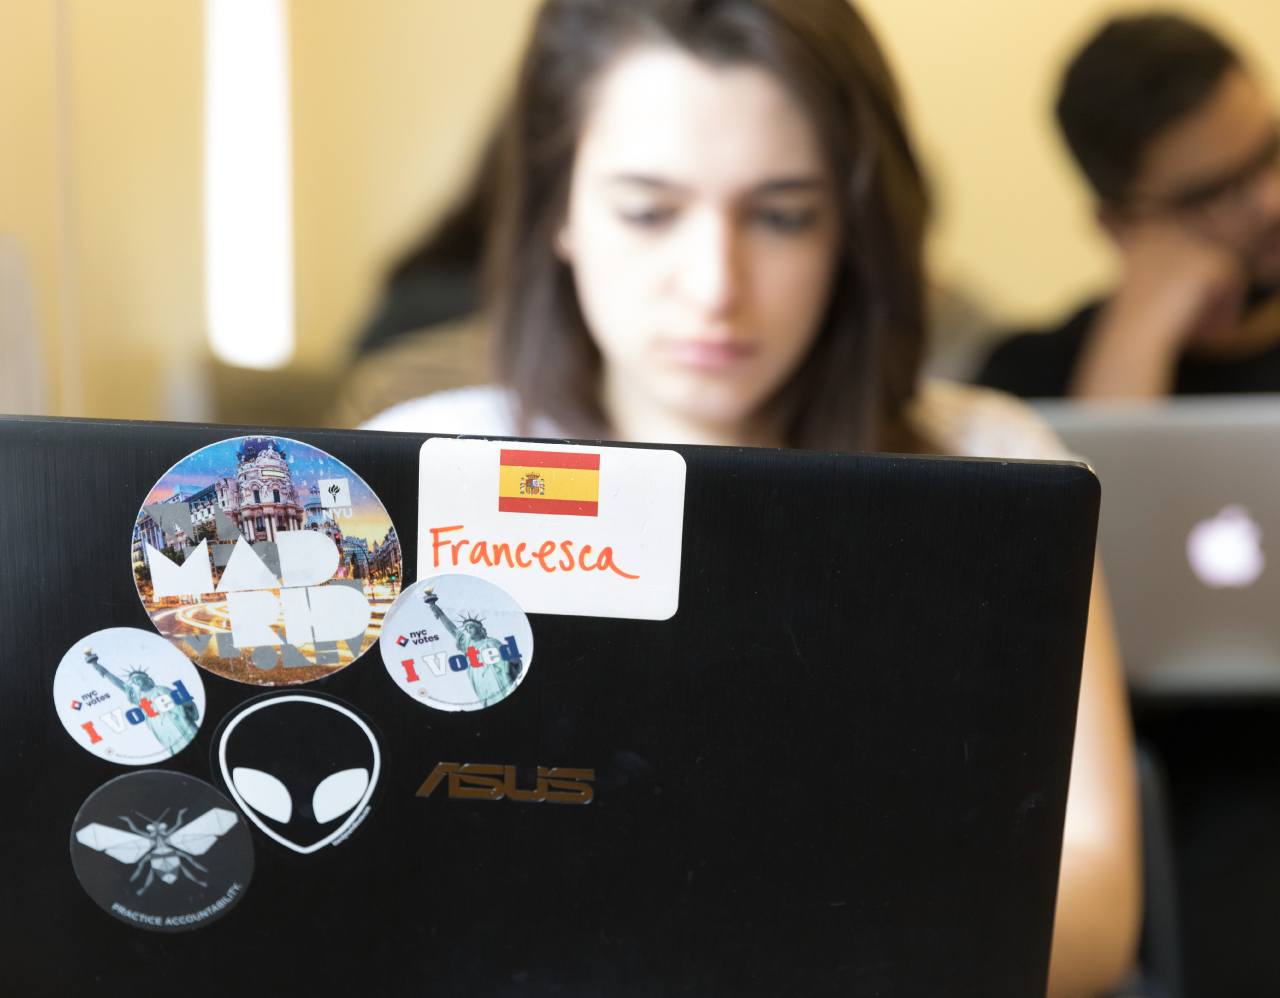 A student on their laptop in class. Their laptop is covered with stickers.